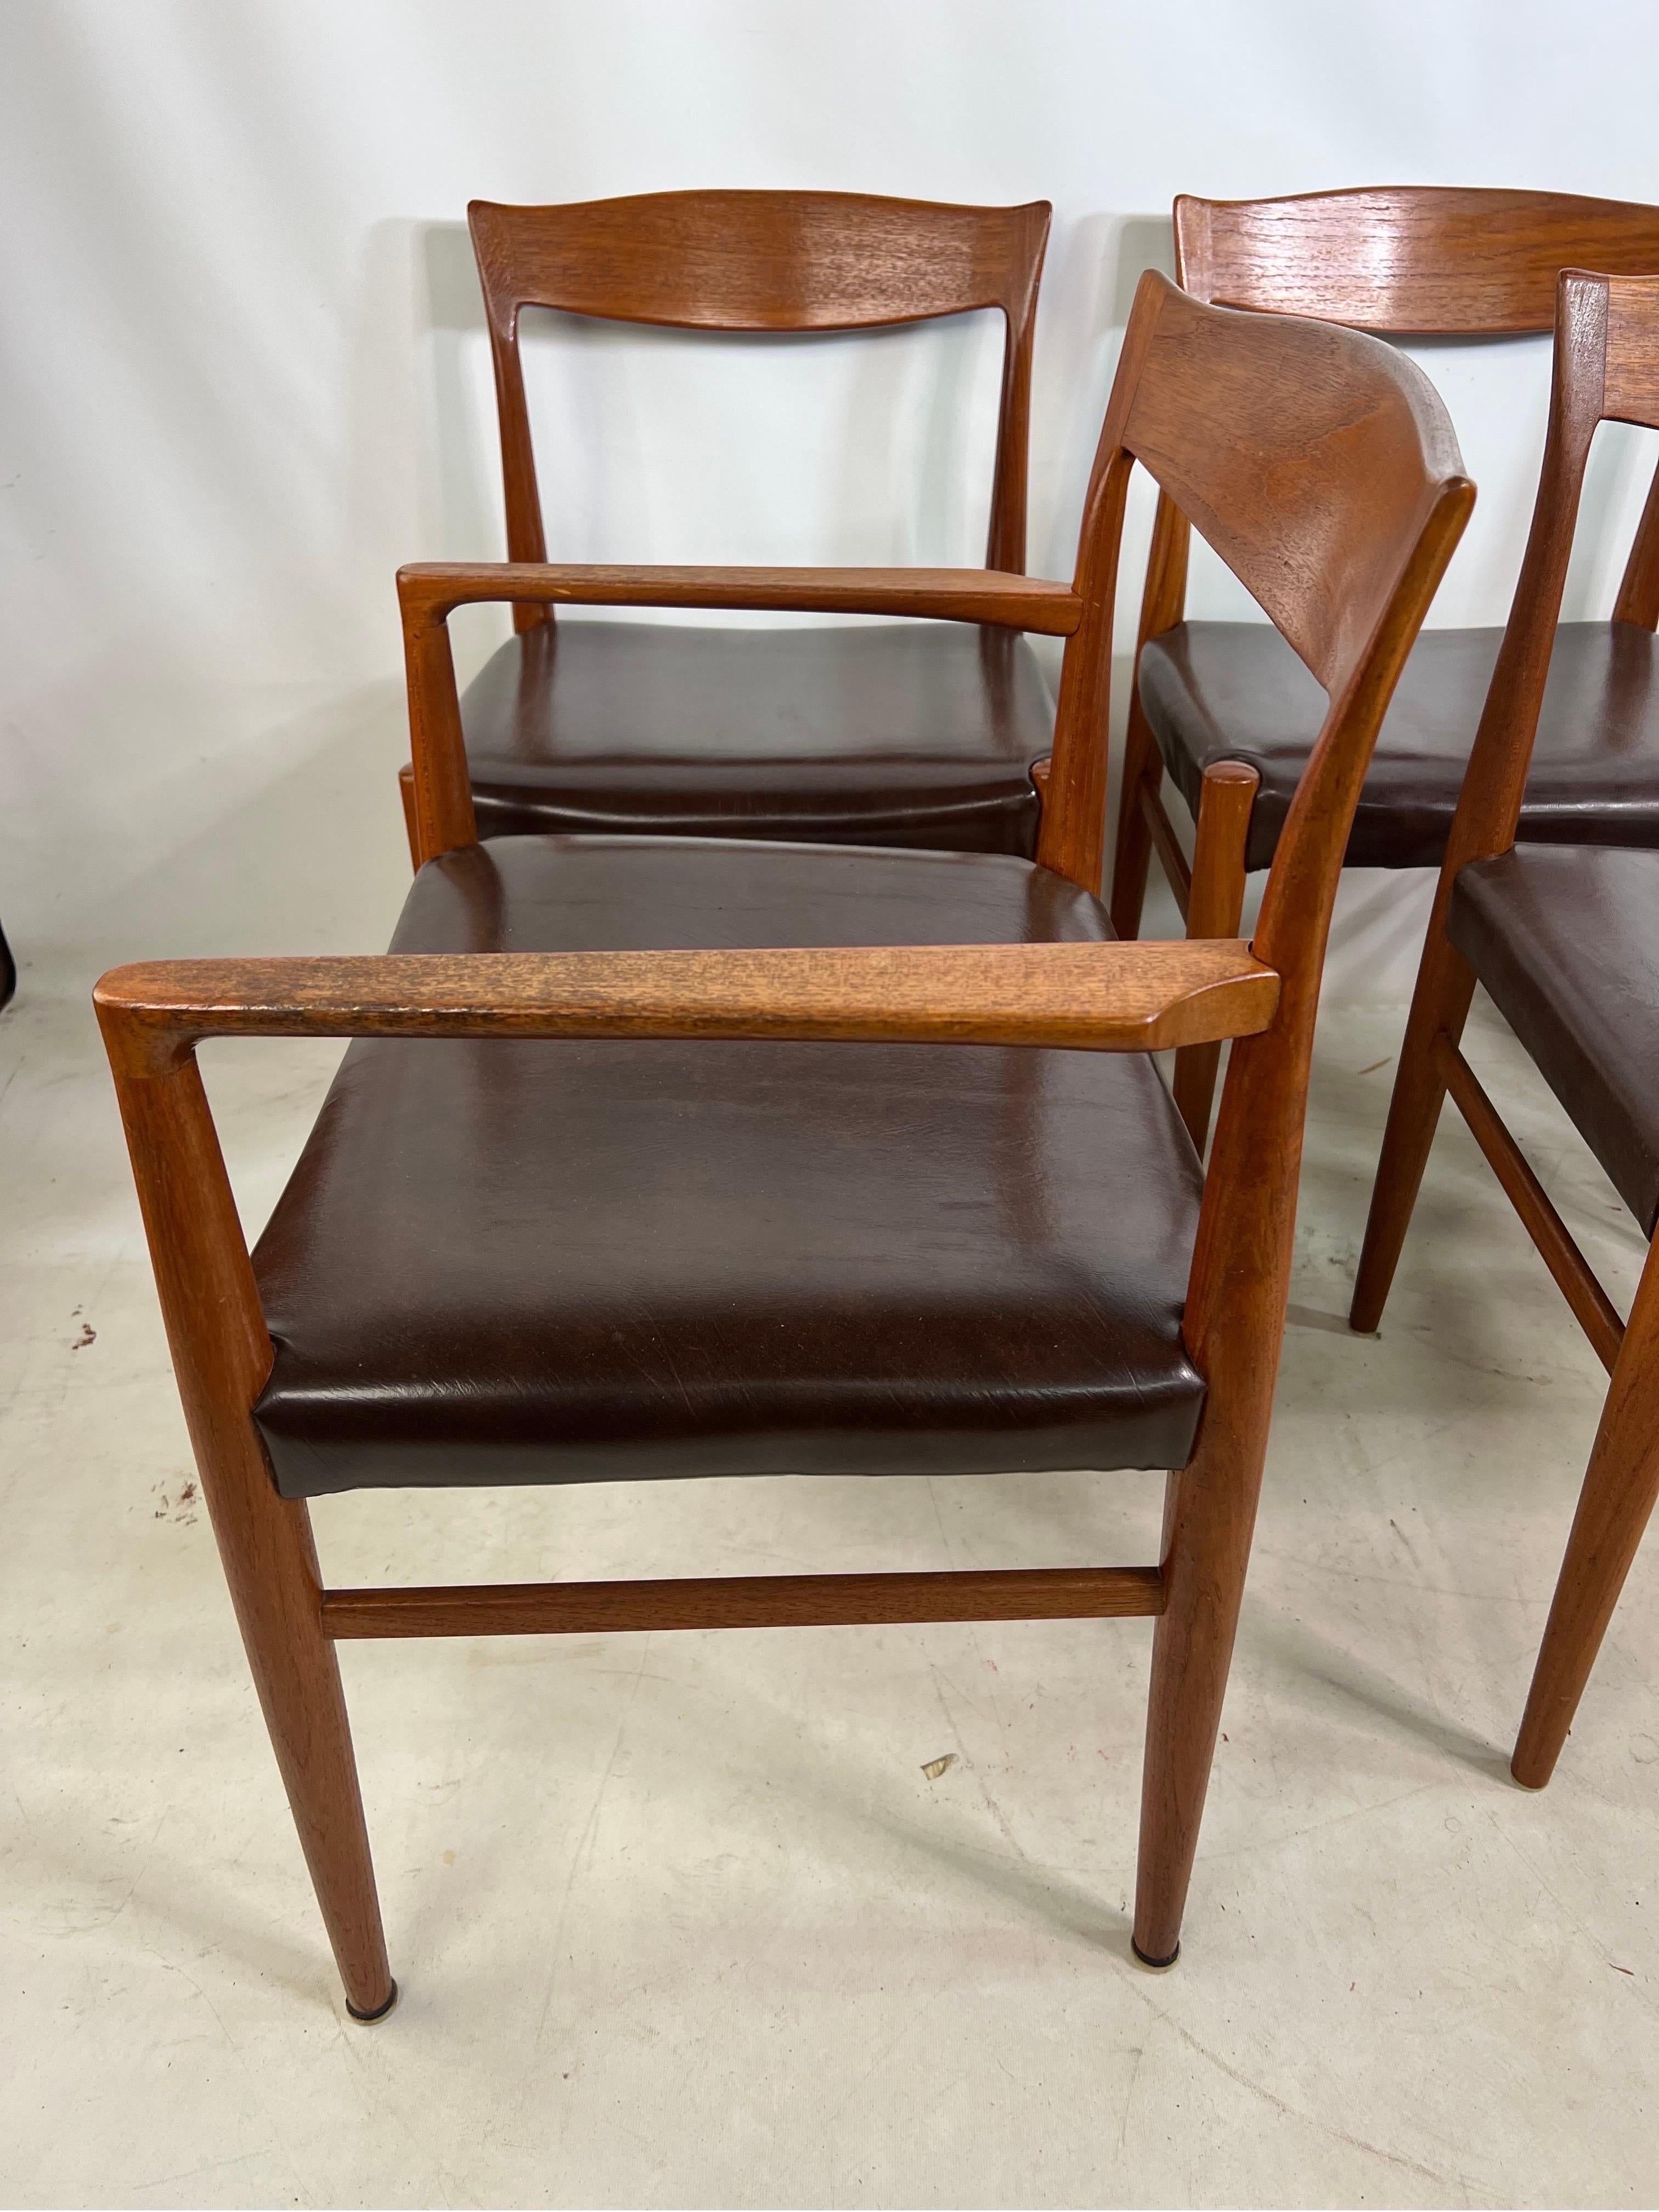 Vintage Danish Teak Sculptural Dining Chairs - a Set of 6 In Good Condition For Sale In Esperance, NY